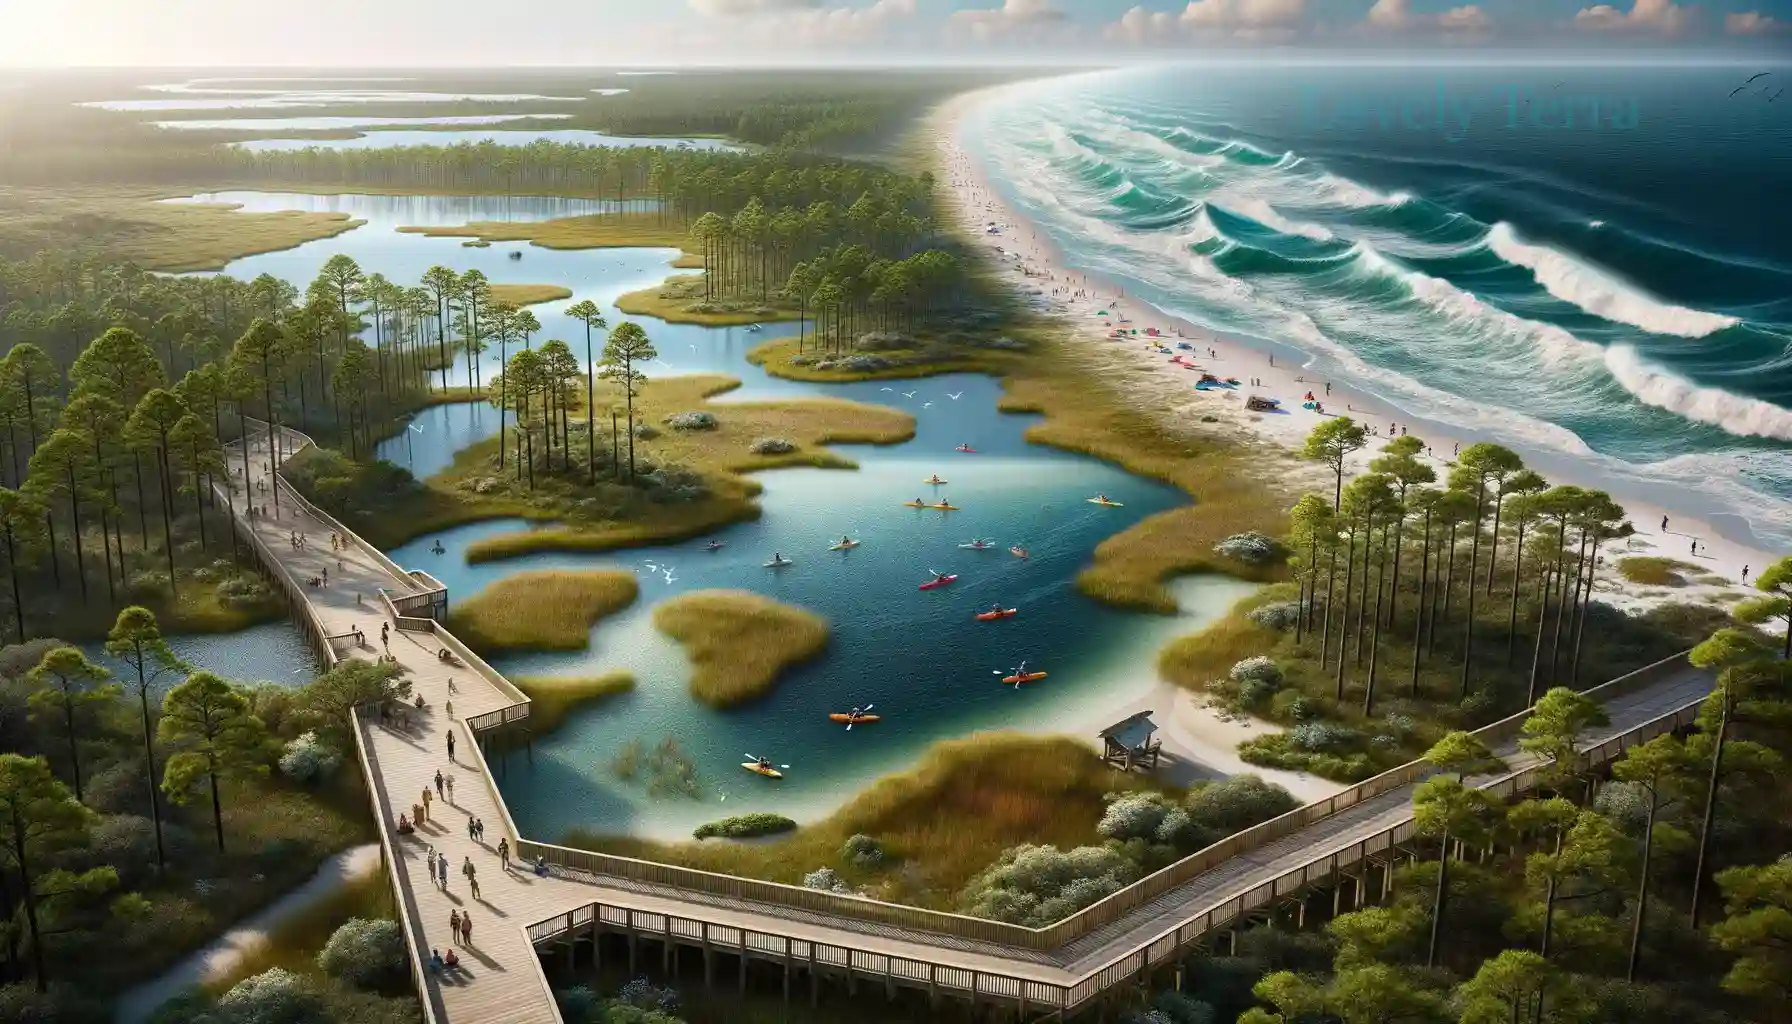 High-fidelity depiction of Camp Helen State Park with a focus on its diverse ecosystem